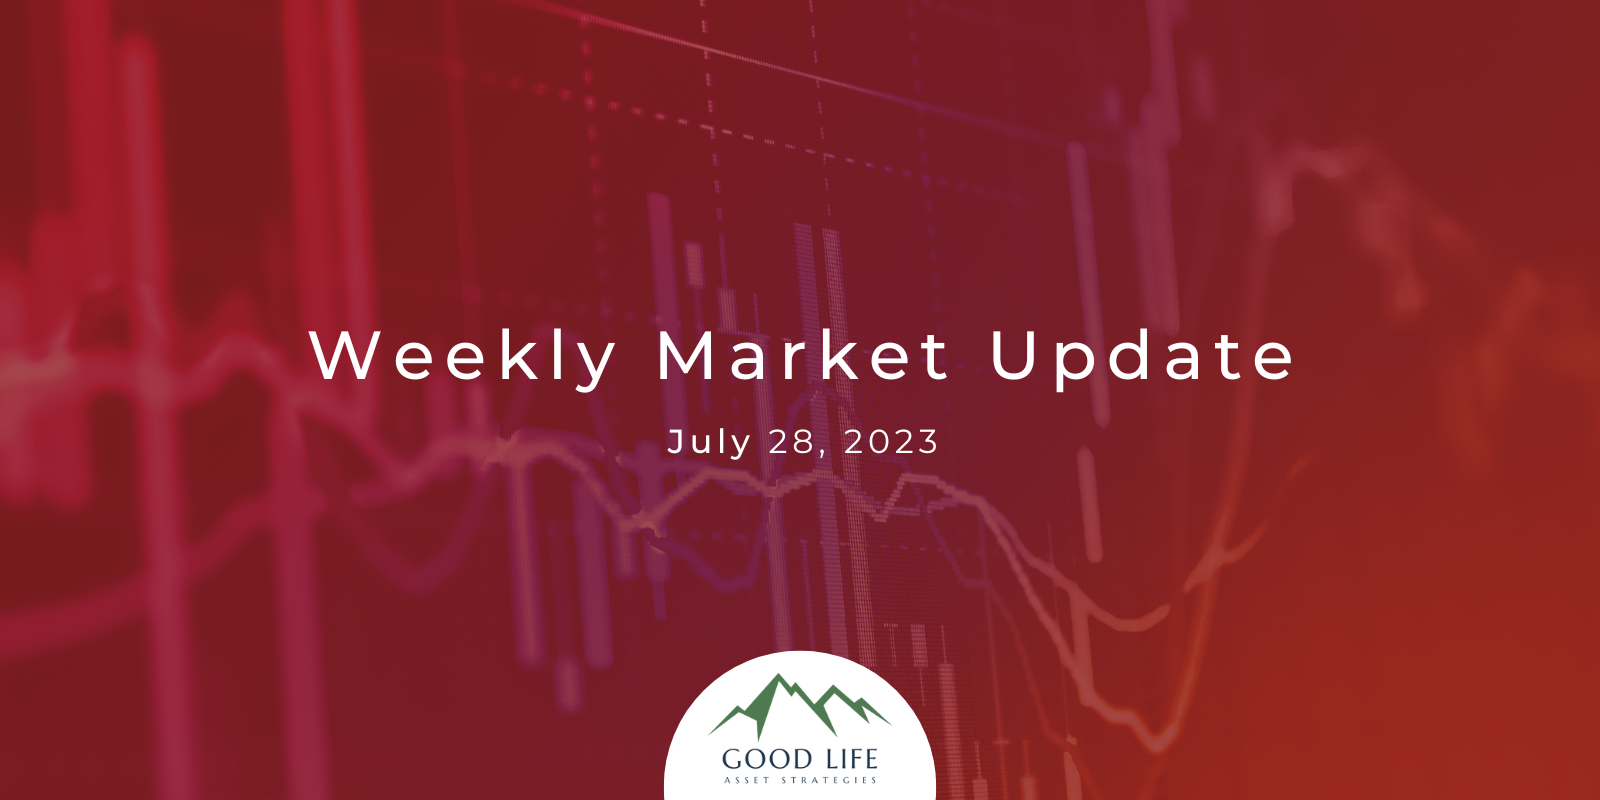 Weekly Market Update for July 28, 2023, from DeWayne Hall: Market Volatility Drives Stocks Higher